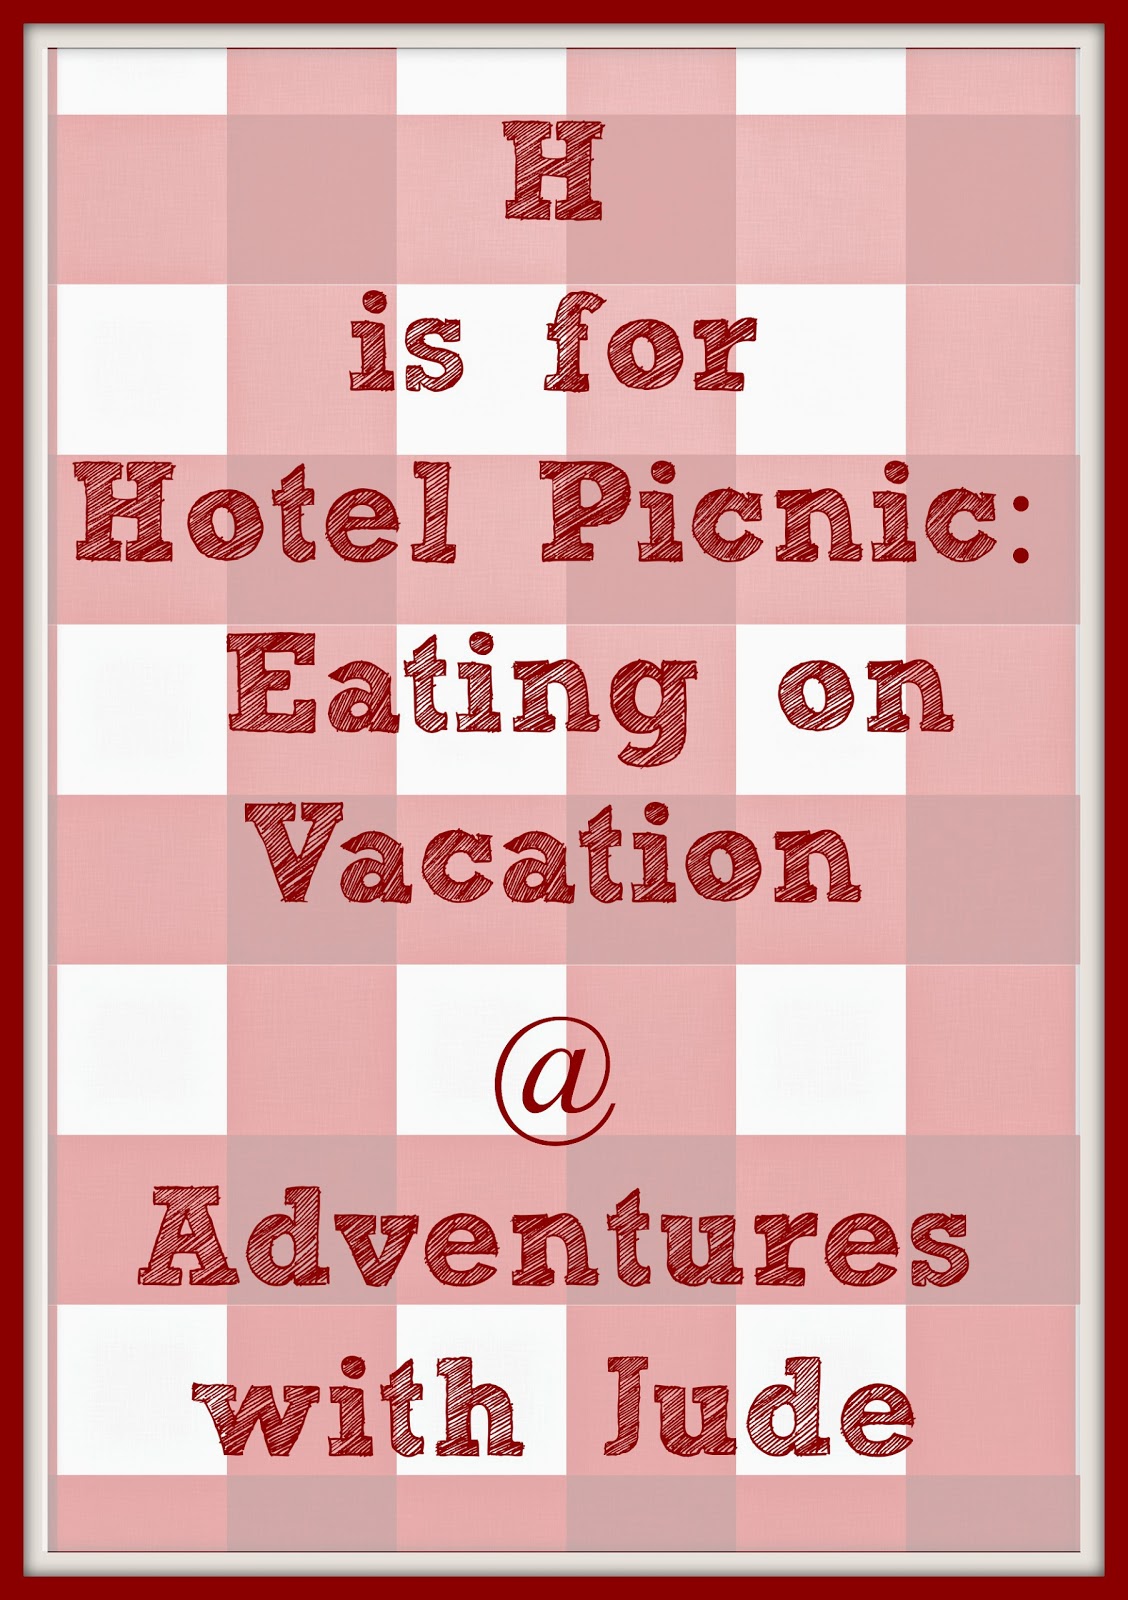 Meal ideas for vactioning in a small hotel suite